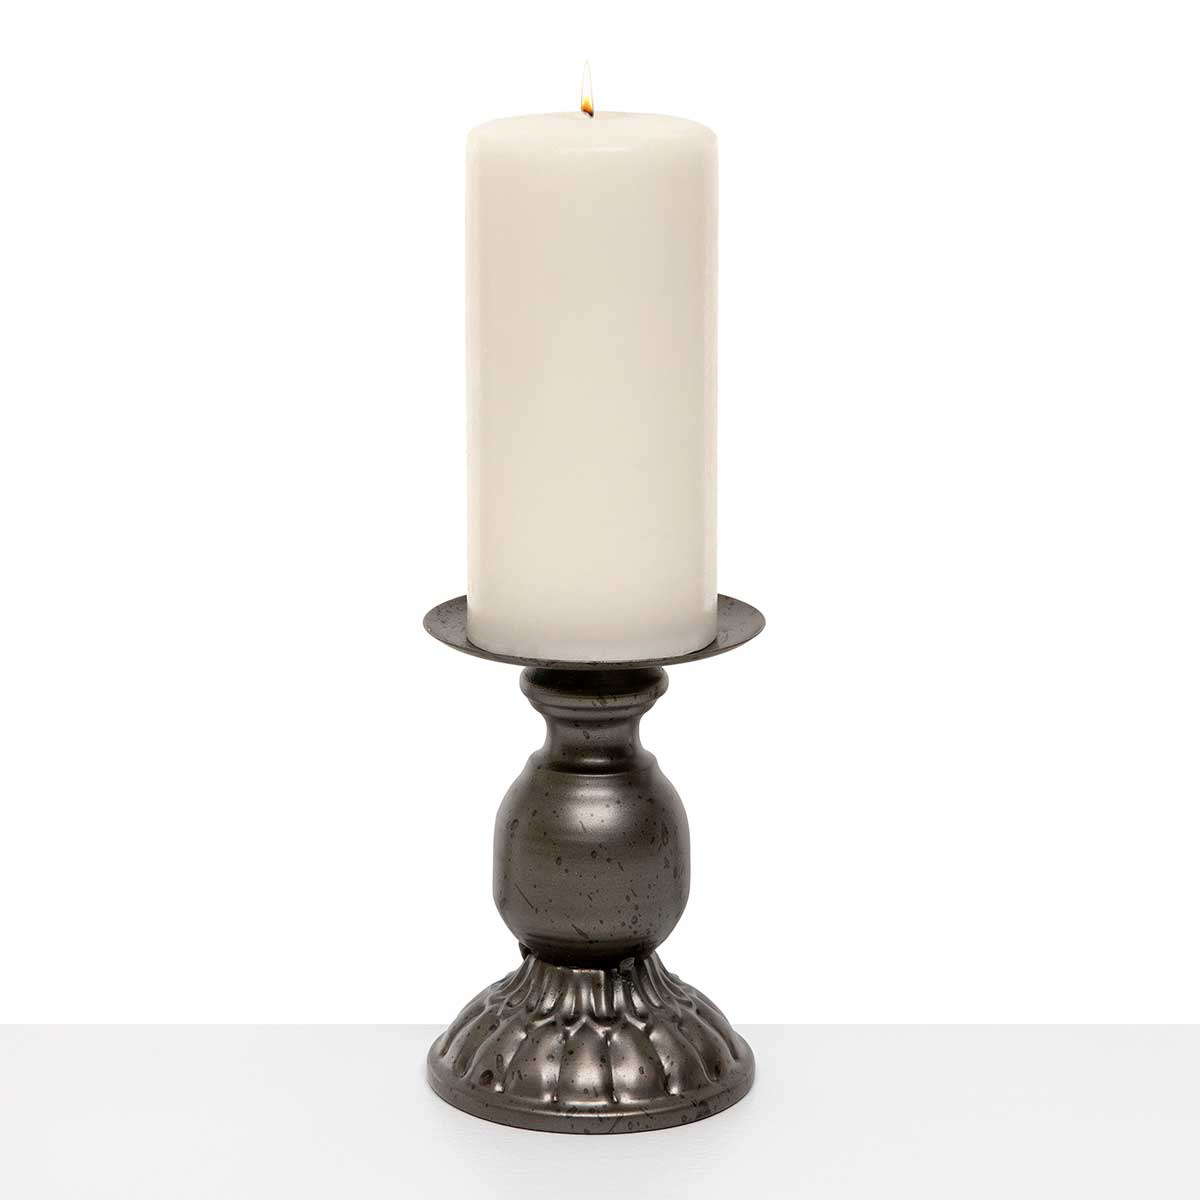 CANDLEHOLDER PEWTER SMALL 3.5IN X 5.5IN METAL